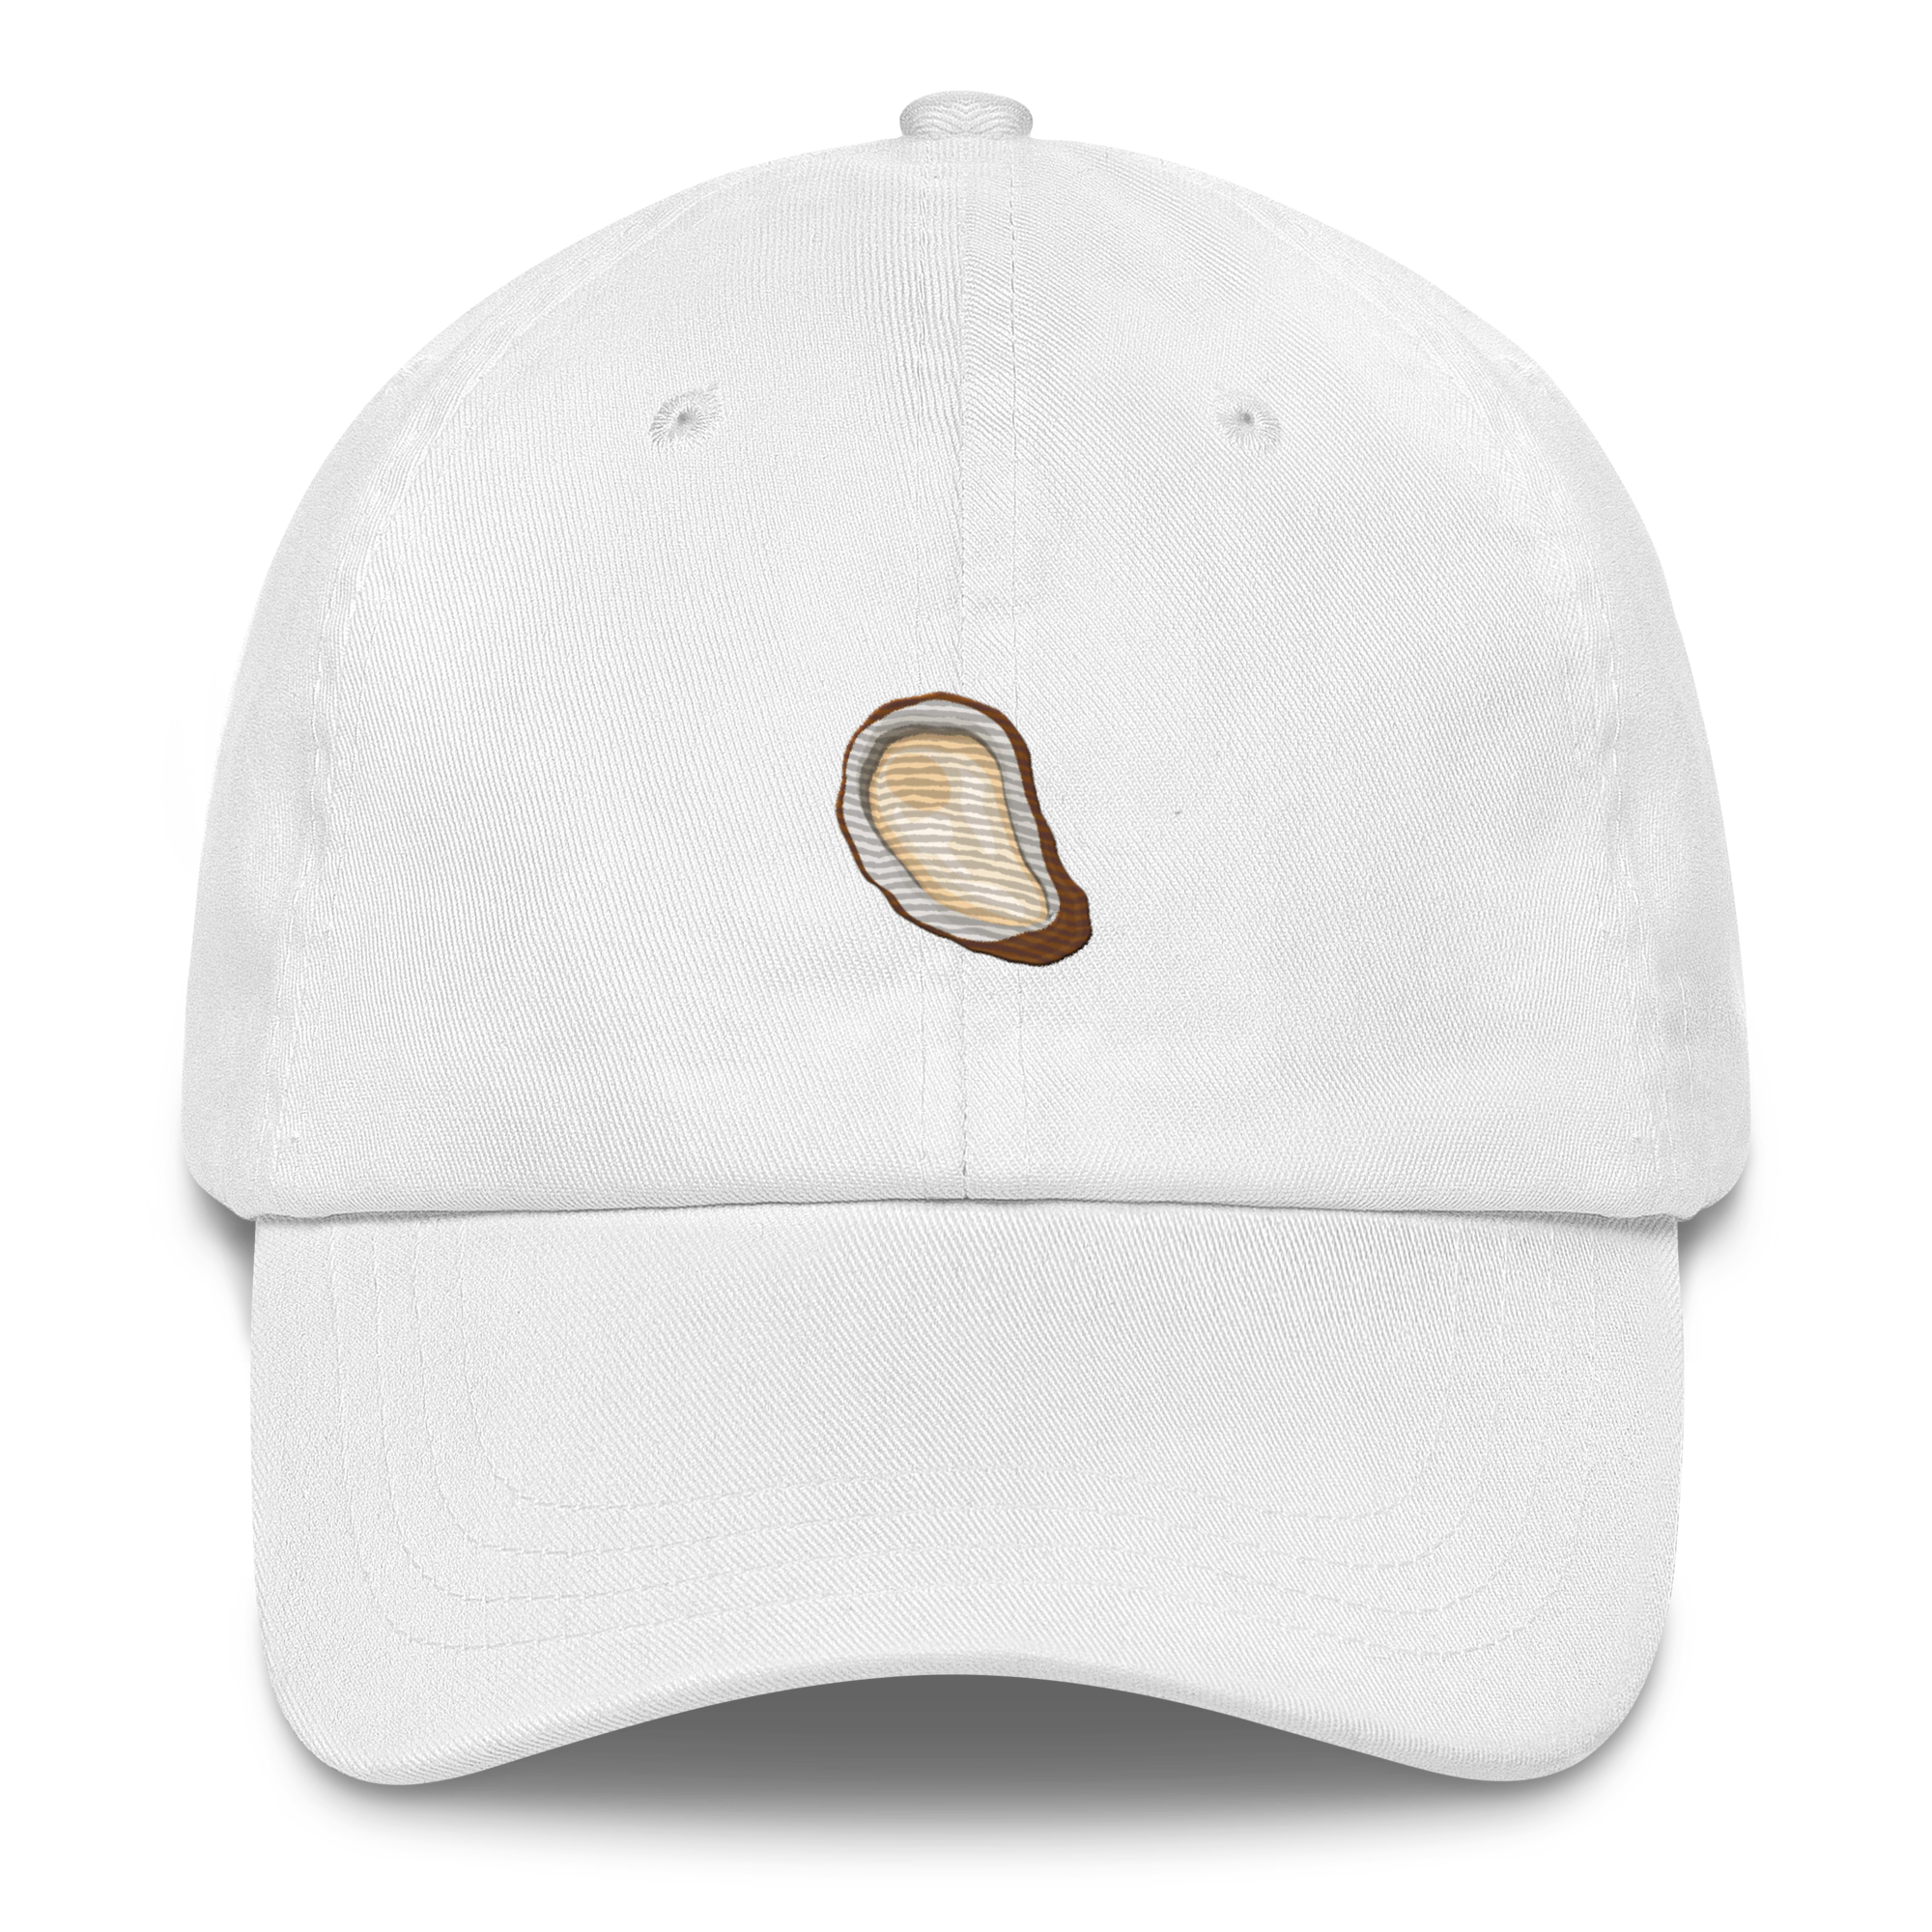 classic-dad-hat-white-front-6684771610ba1.png